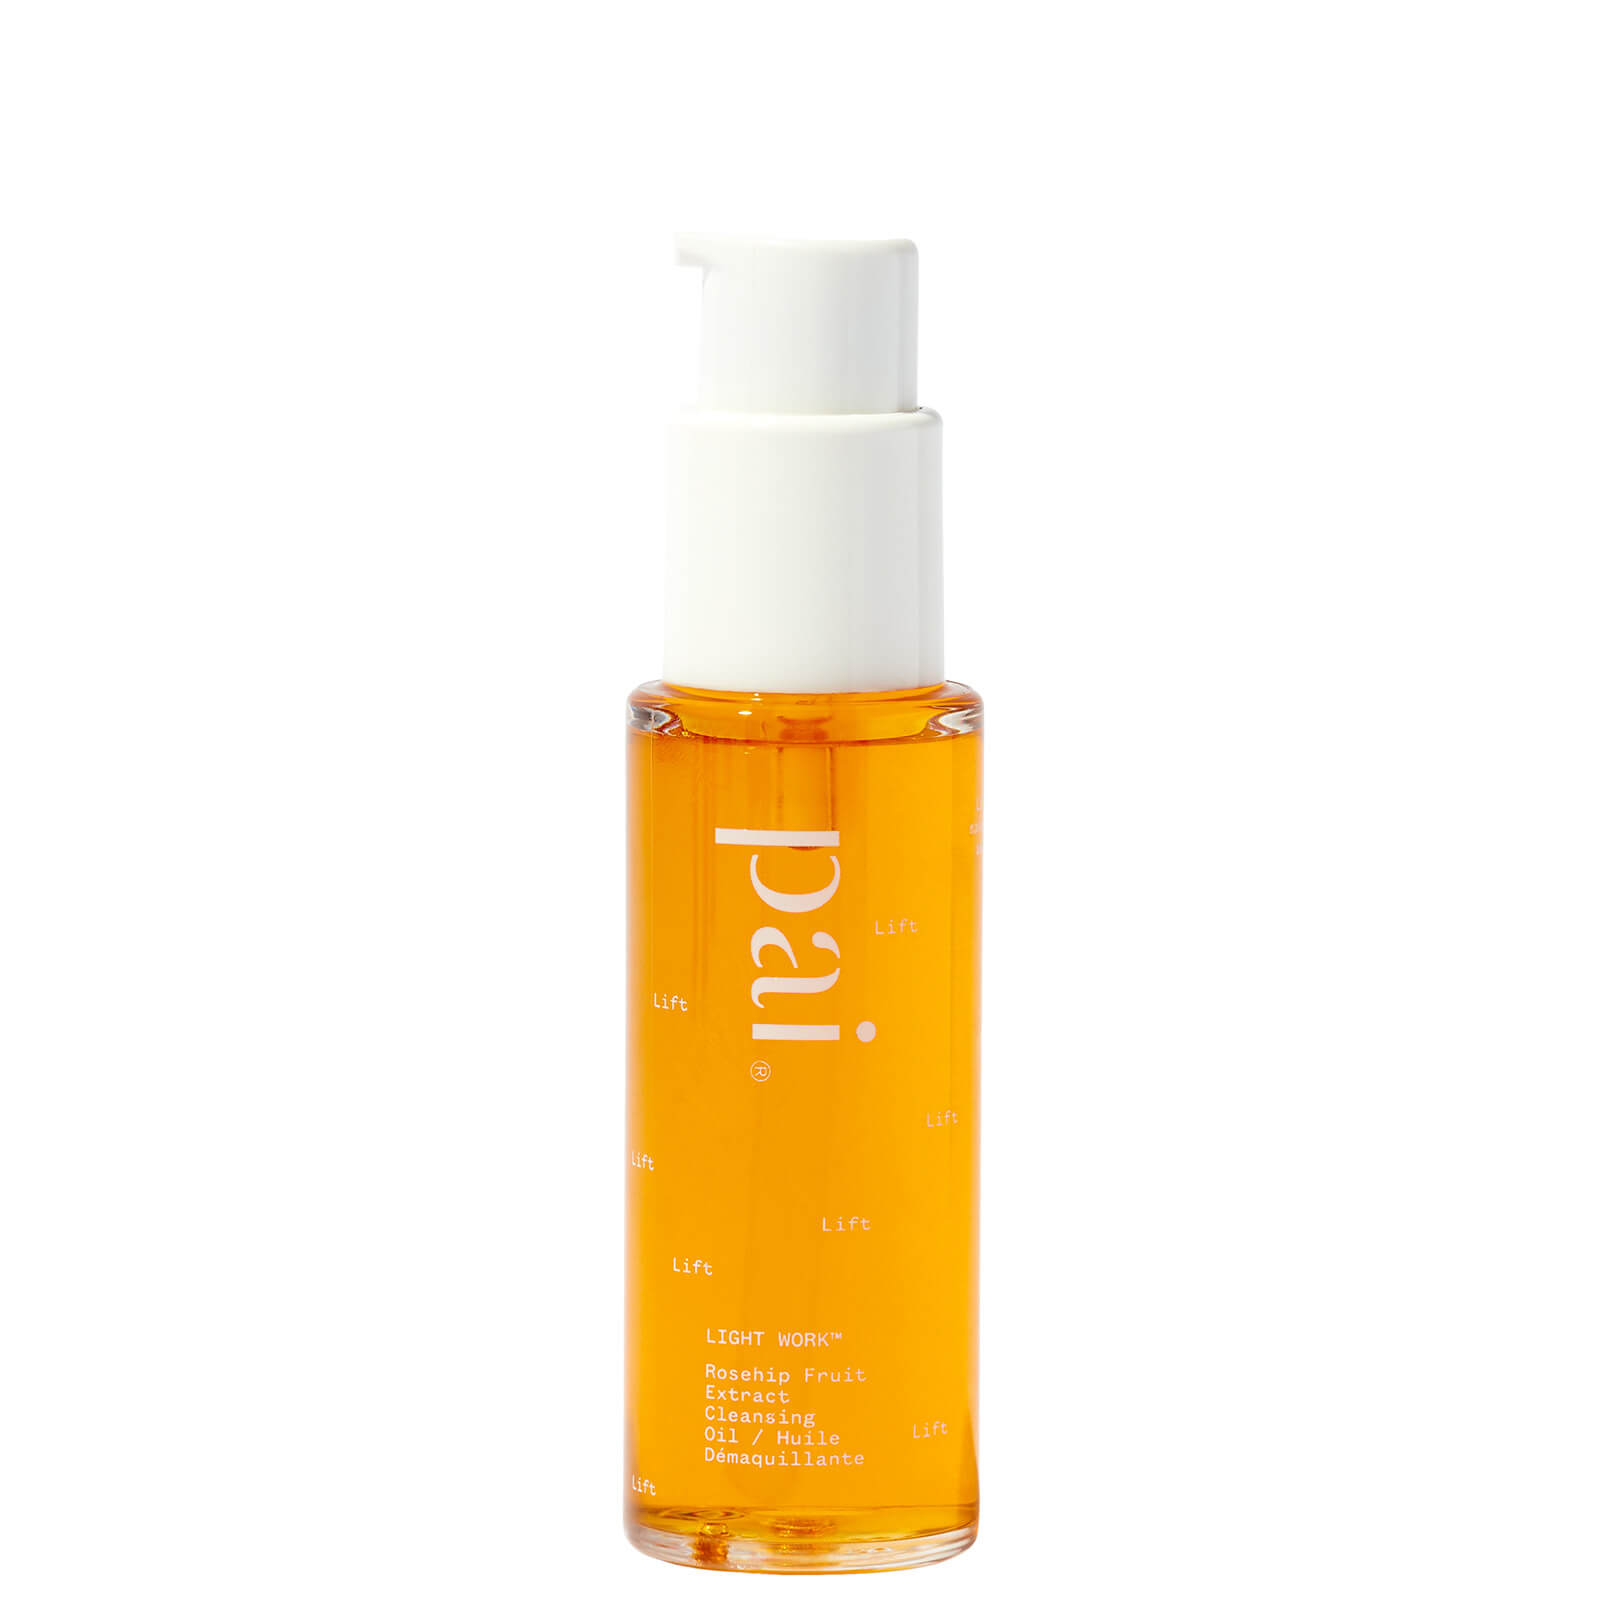 Photos - Facial / Body Cleansing Product Pai Skincare Light Work Rosehip Cleansing Oil 28ml